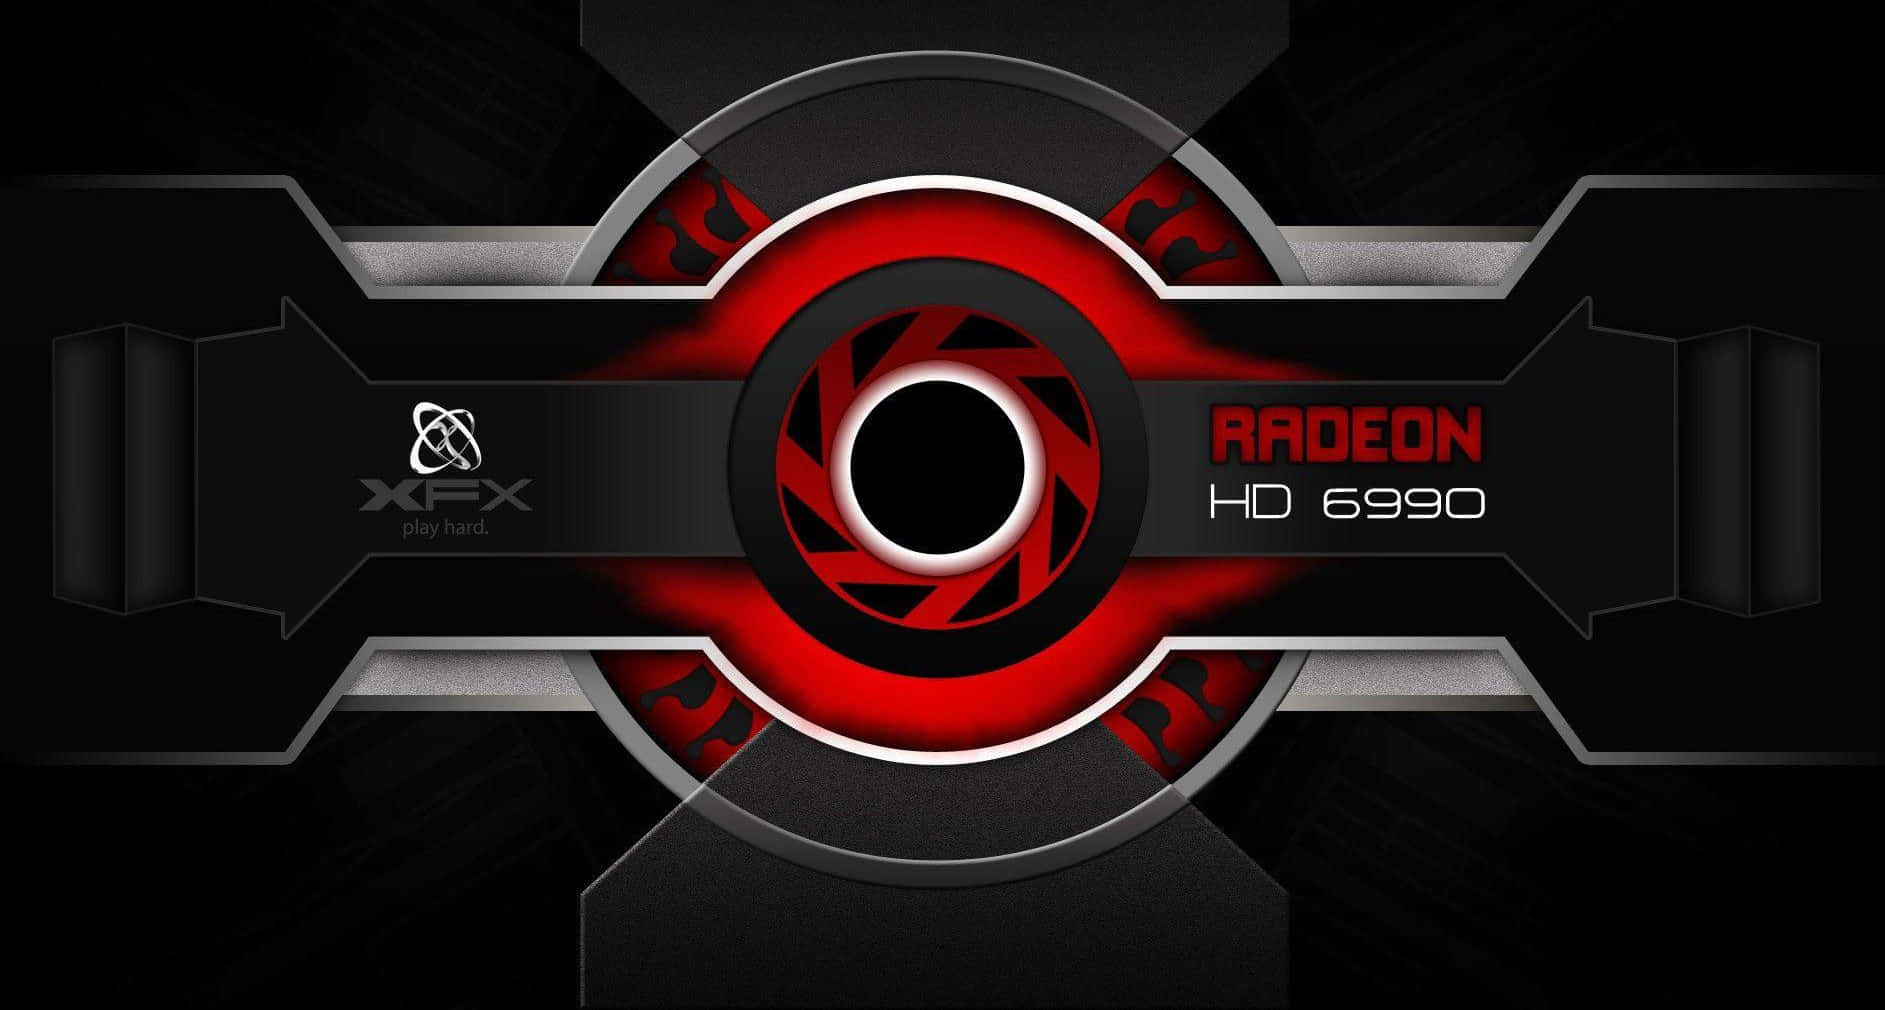 Exploring The World With Radeon Wallpaper